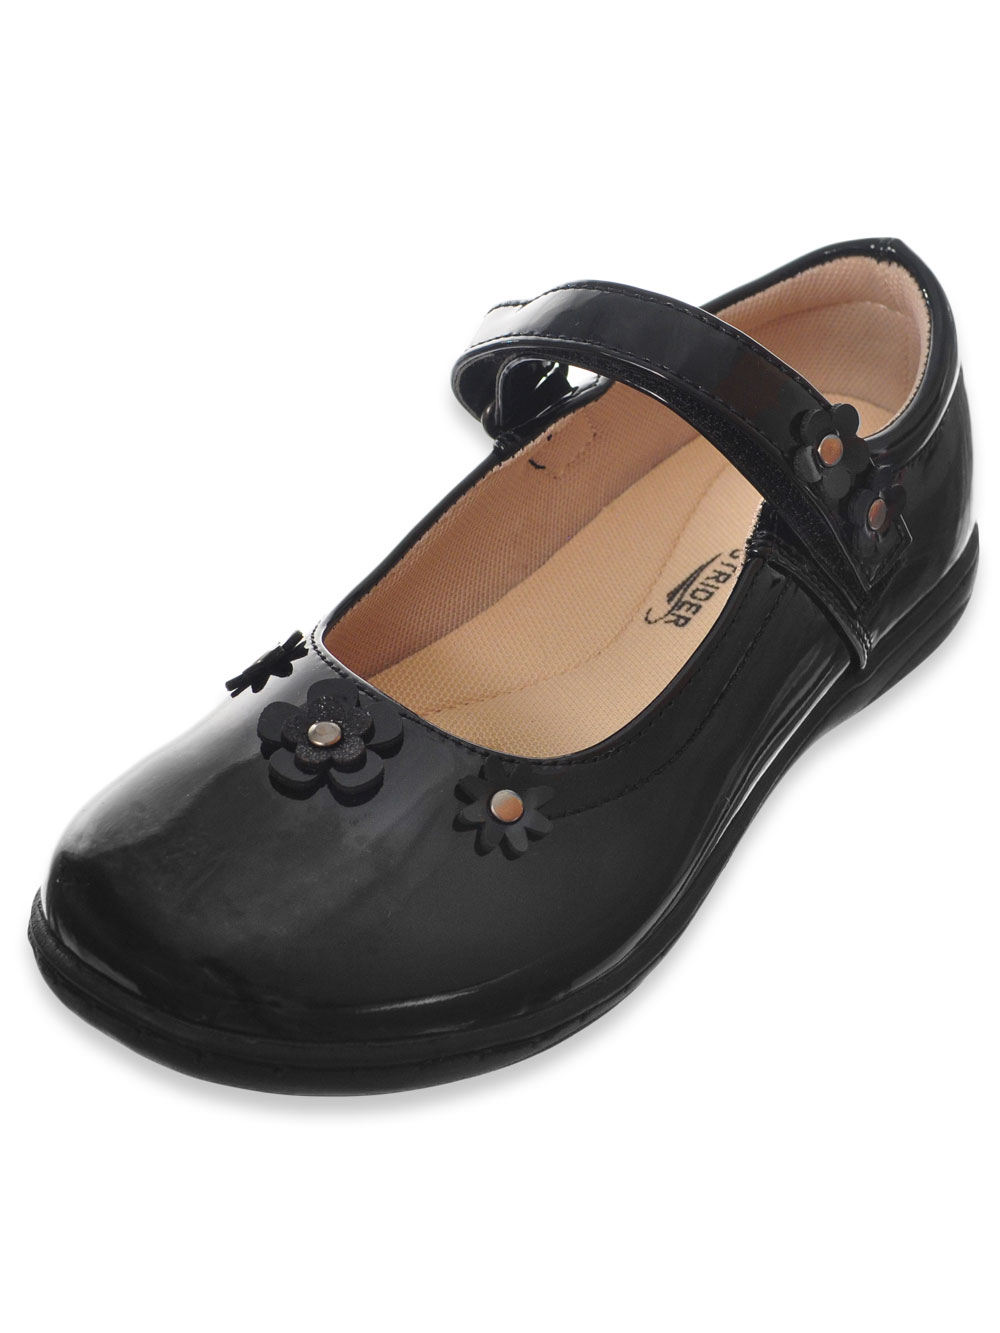 Girls' Mary Jane Shoes by Easy Strider 